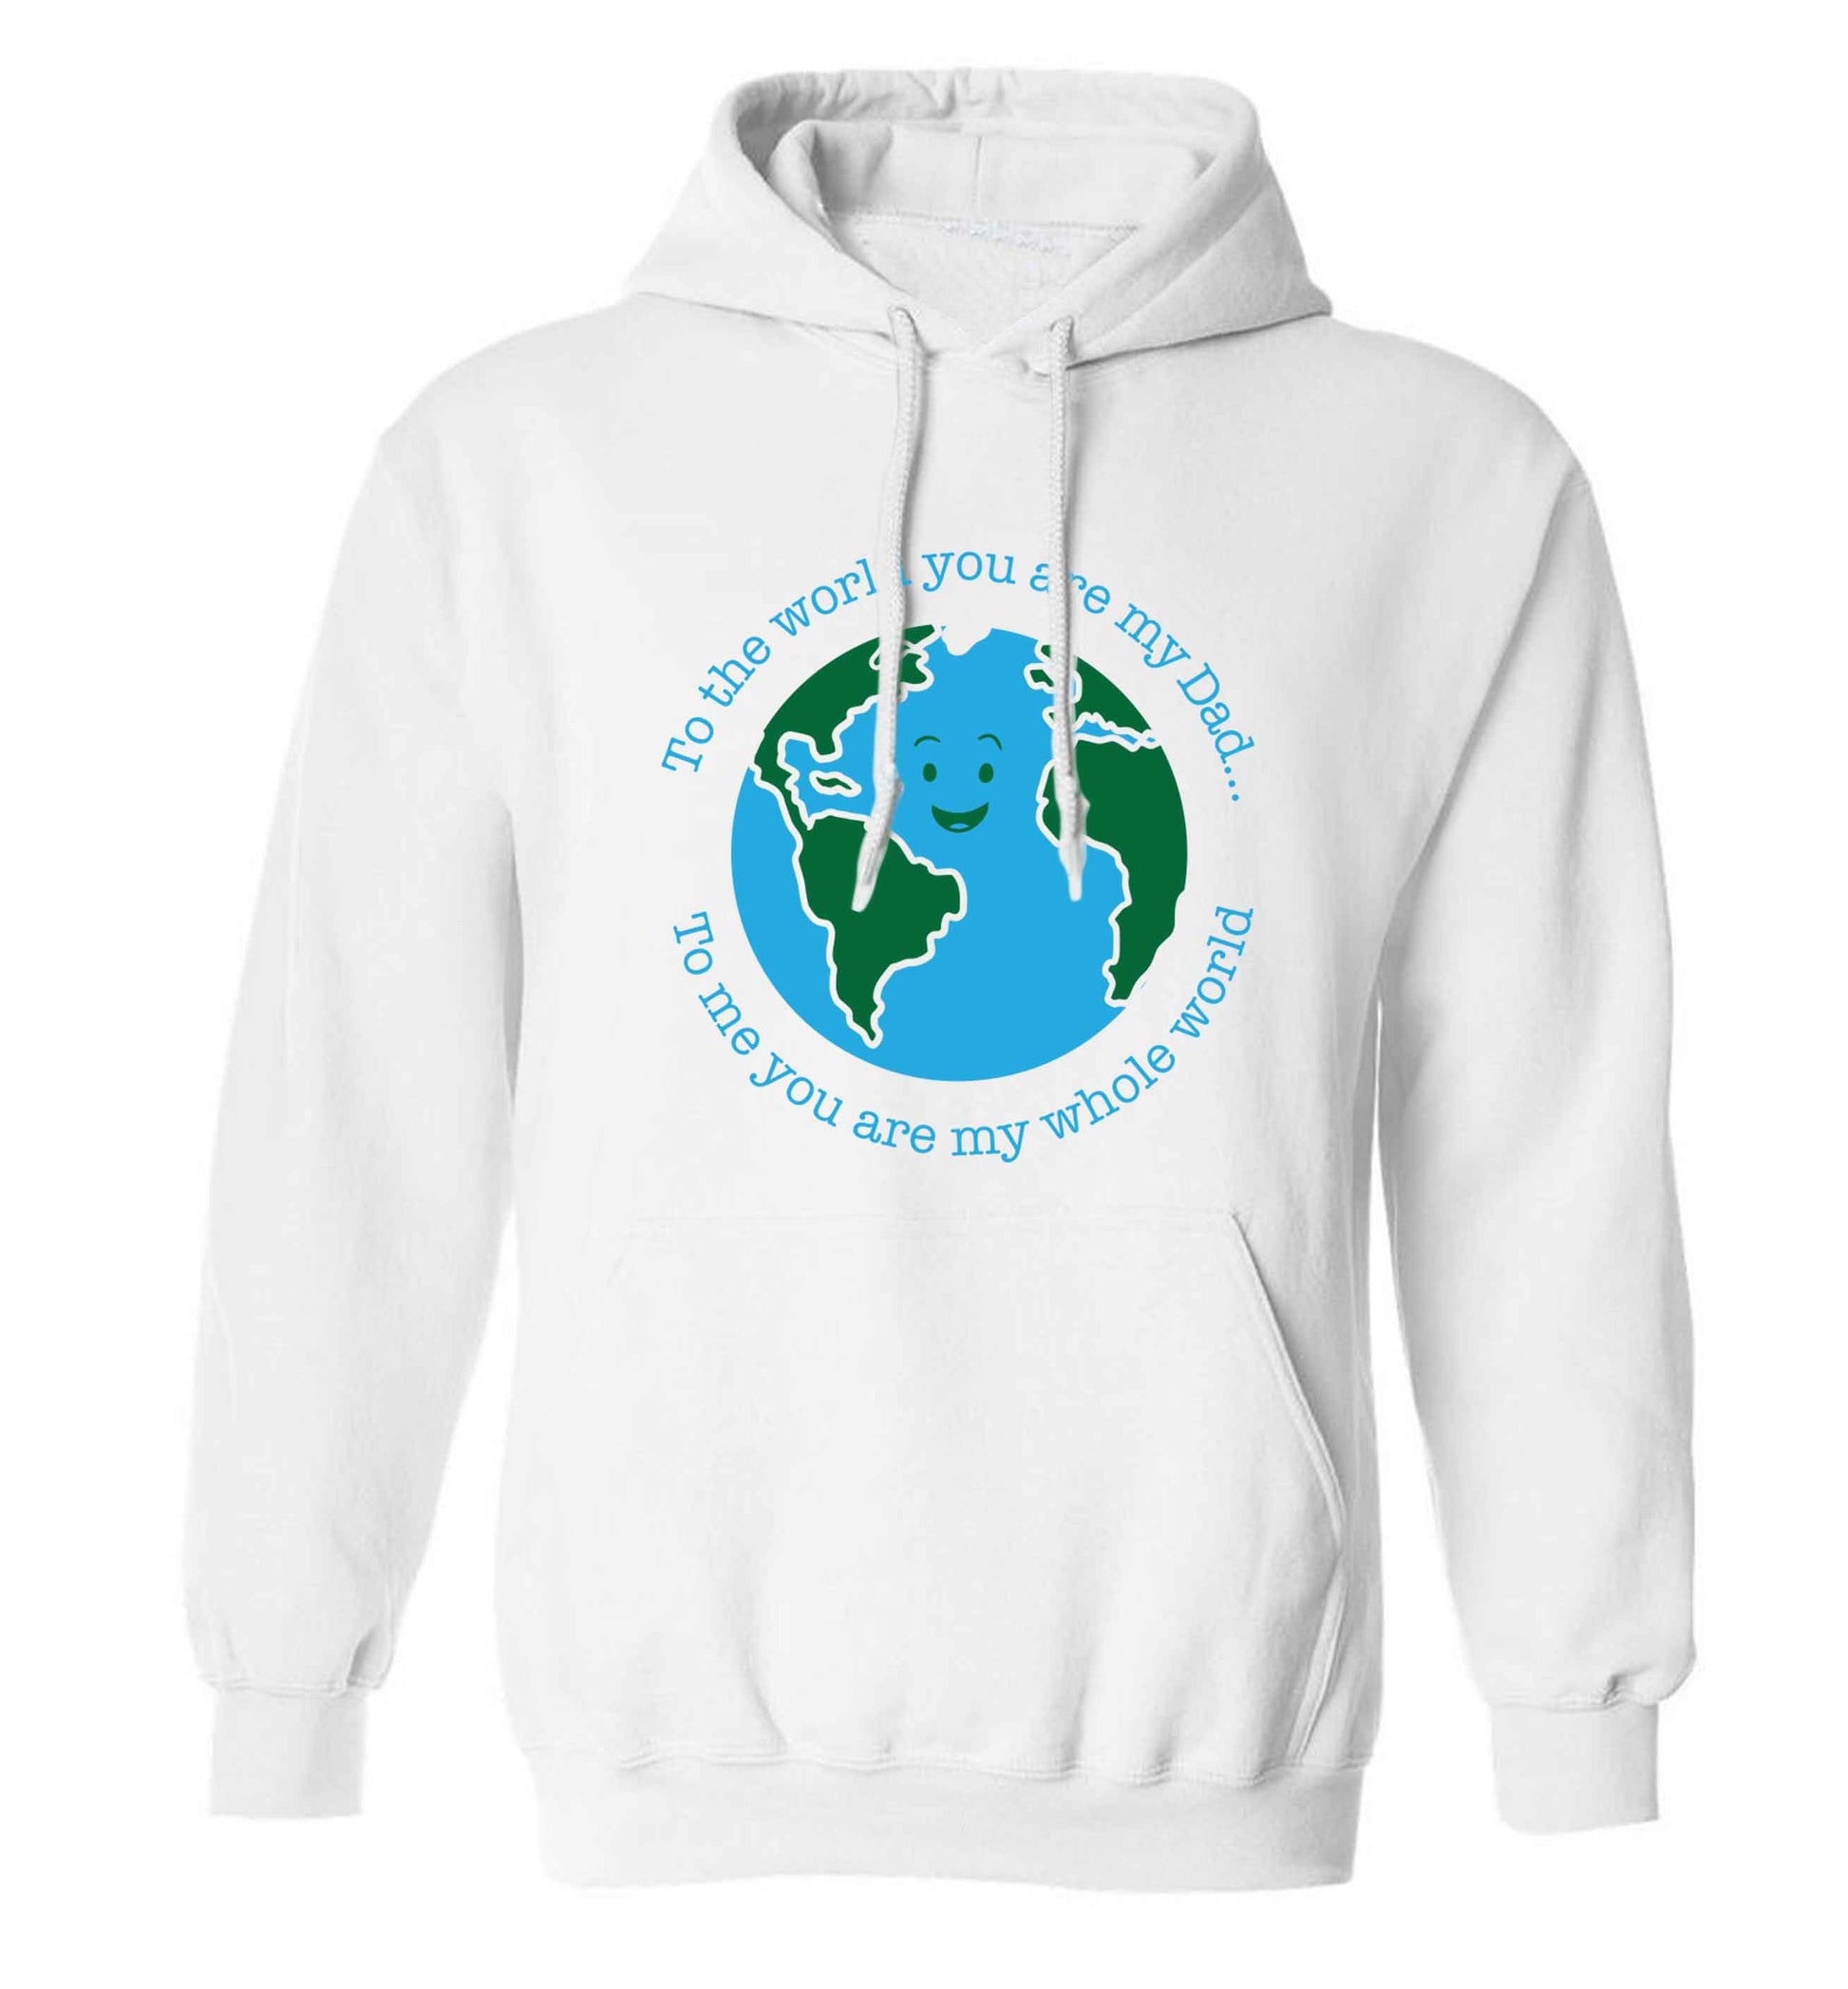 To the world you are my dad, to me you are my whole world adults unisex white hoodie 2XL